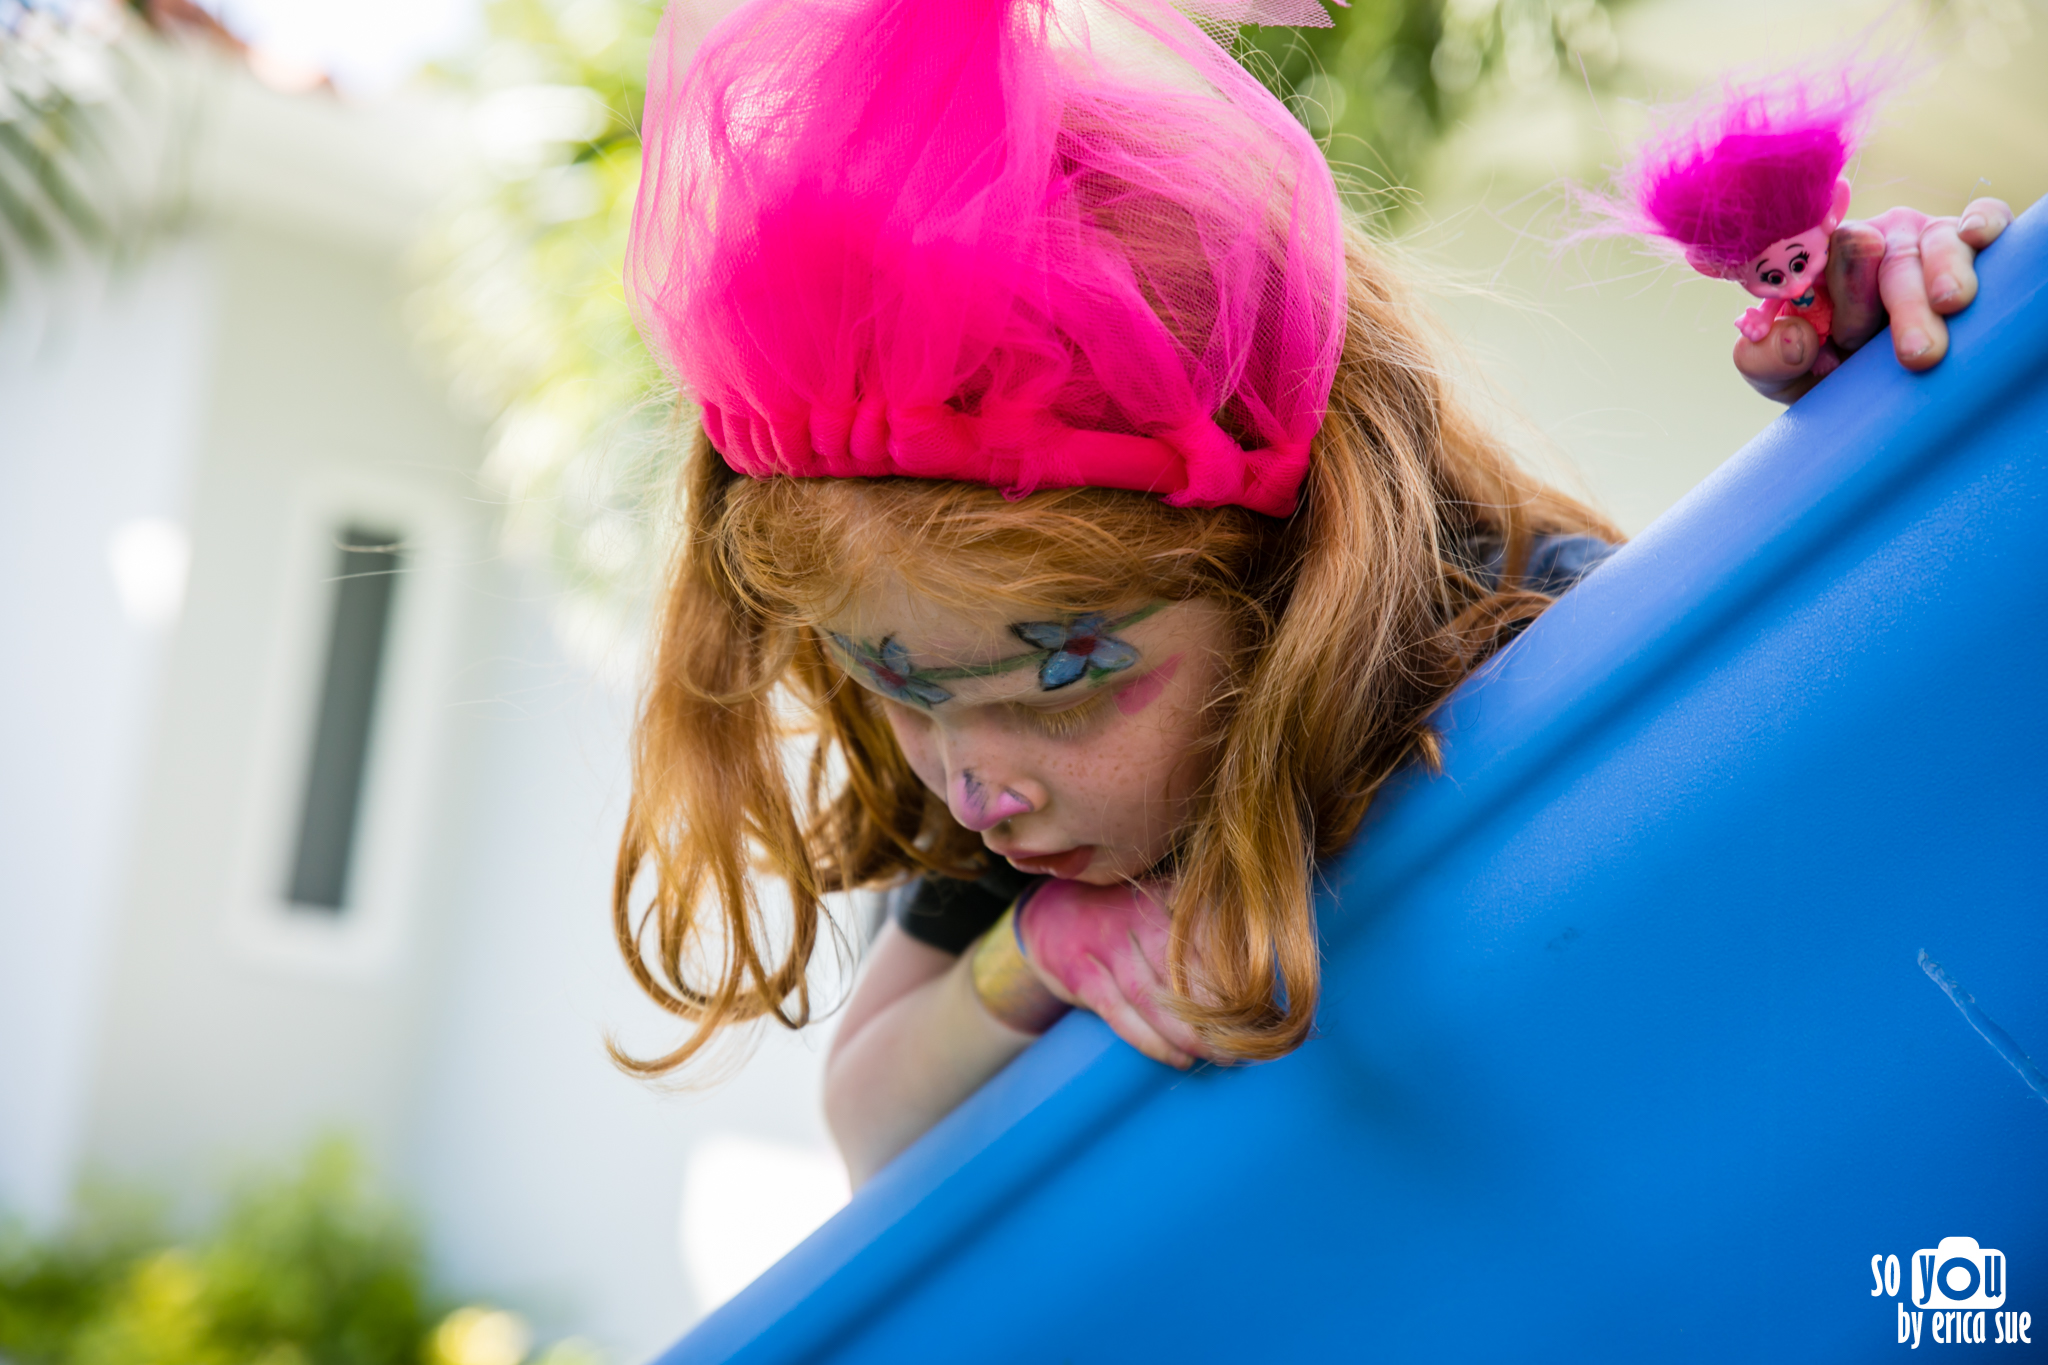 family-photography-so-you-by-erica-sue-ft-lauderdale-fl-florida-trolls-movie-birthday-party-3451.jpg